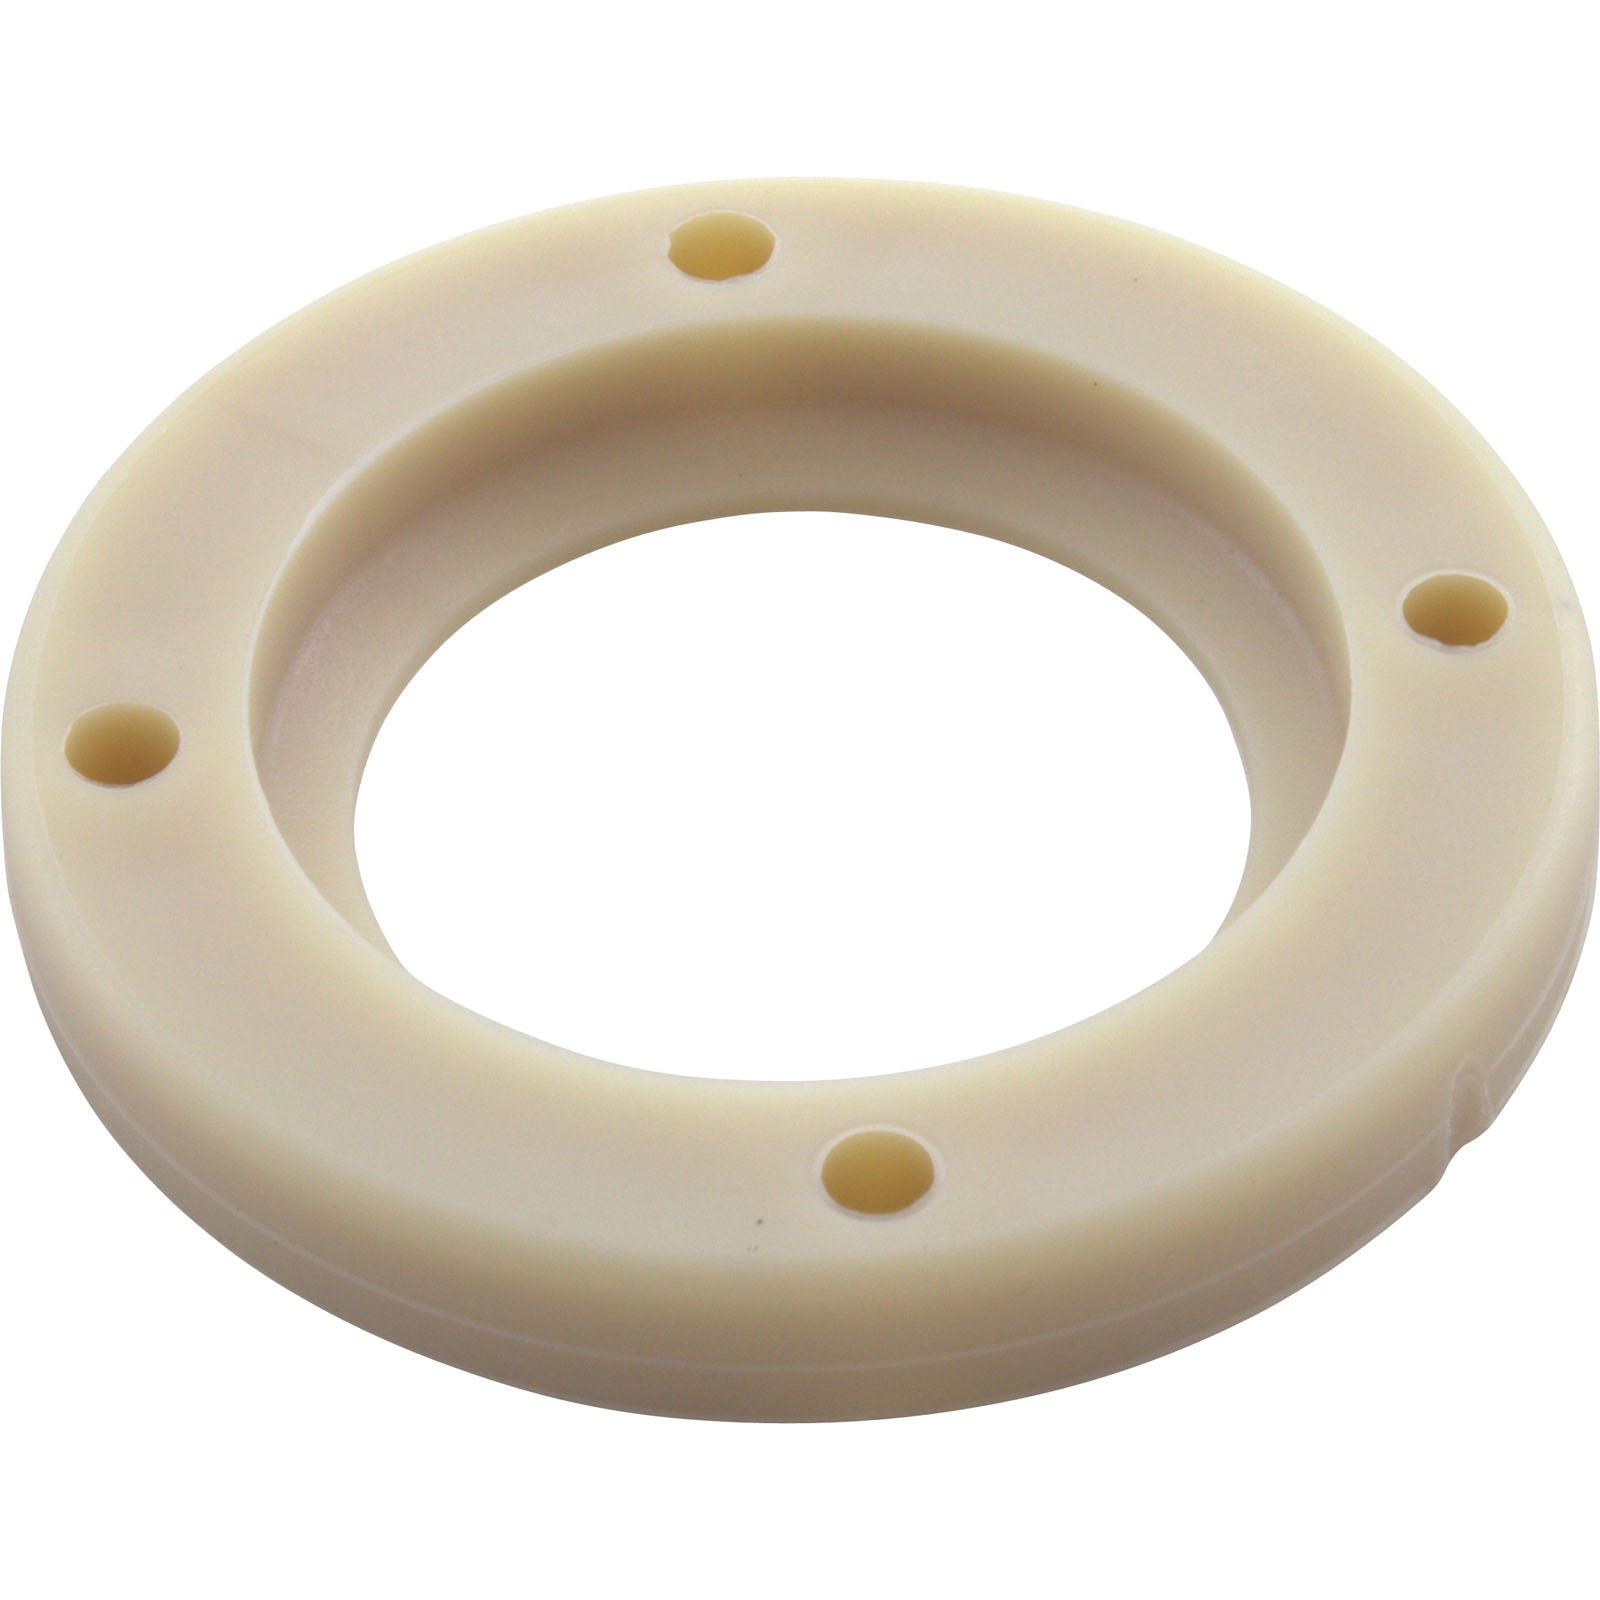 RETAINING RING, JACUZZI P AND W HYDROTHERAPY JET | 43-0592-11-R